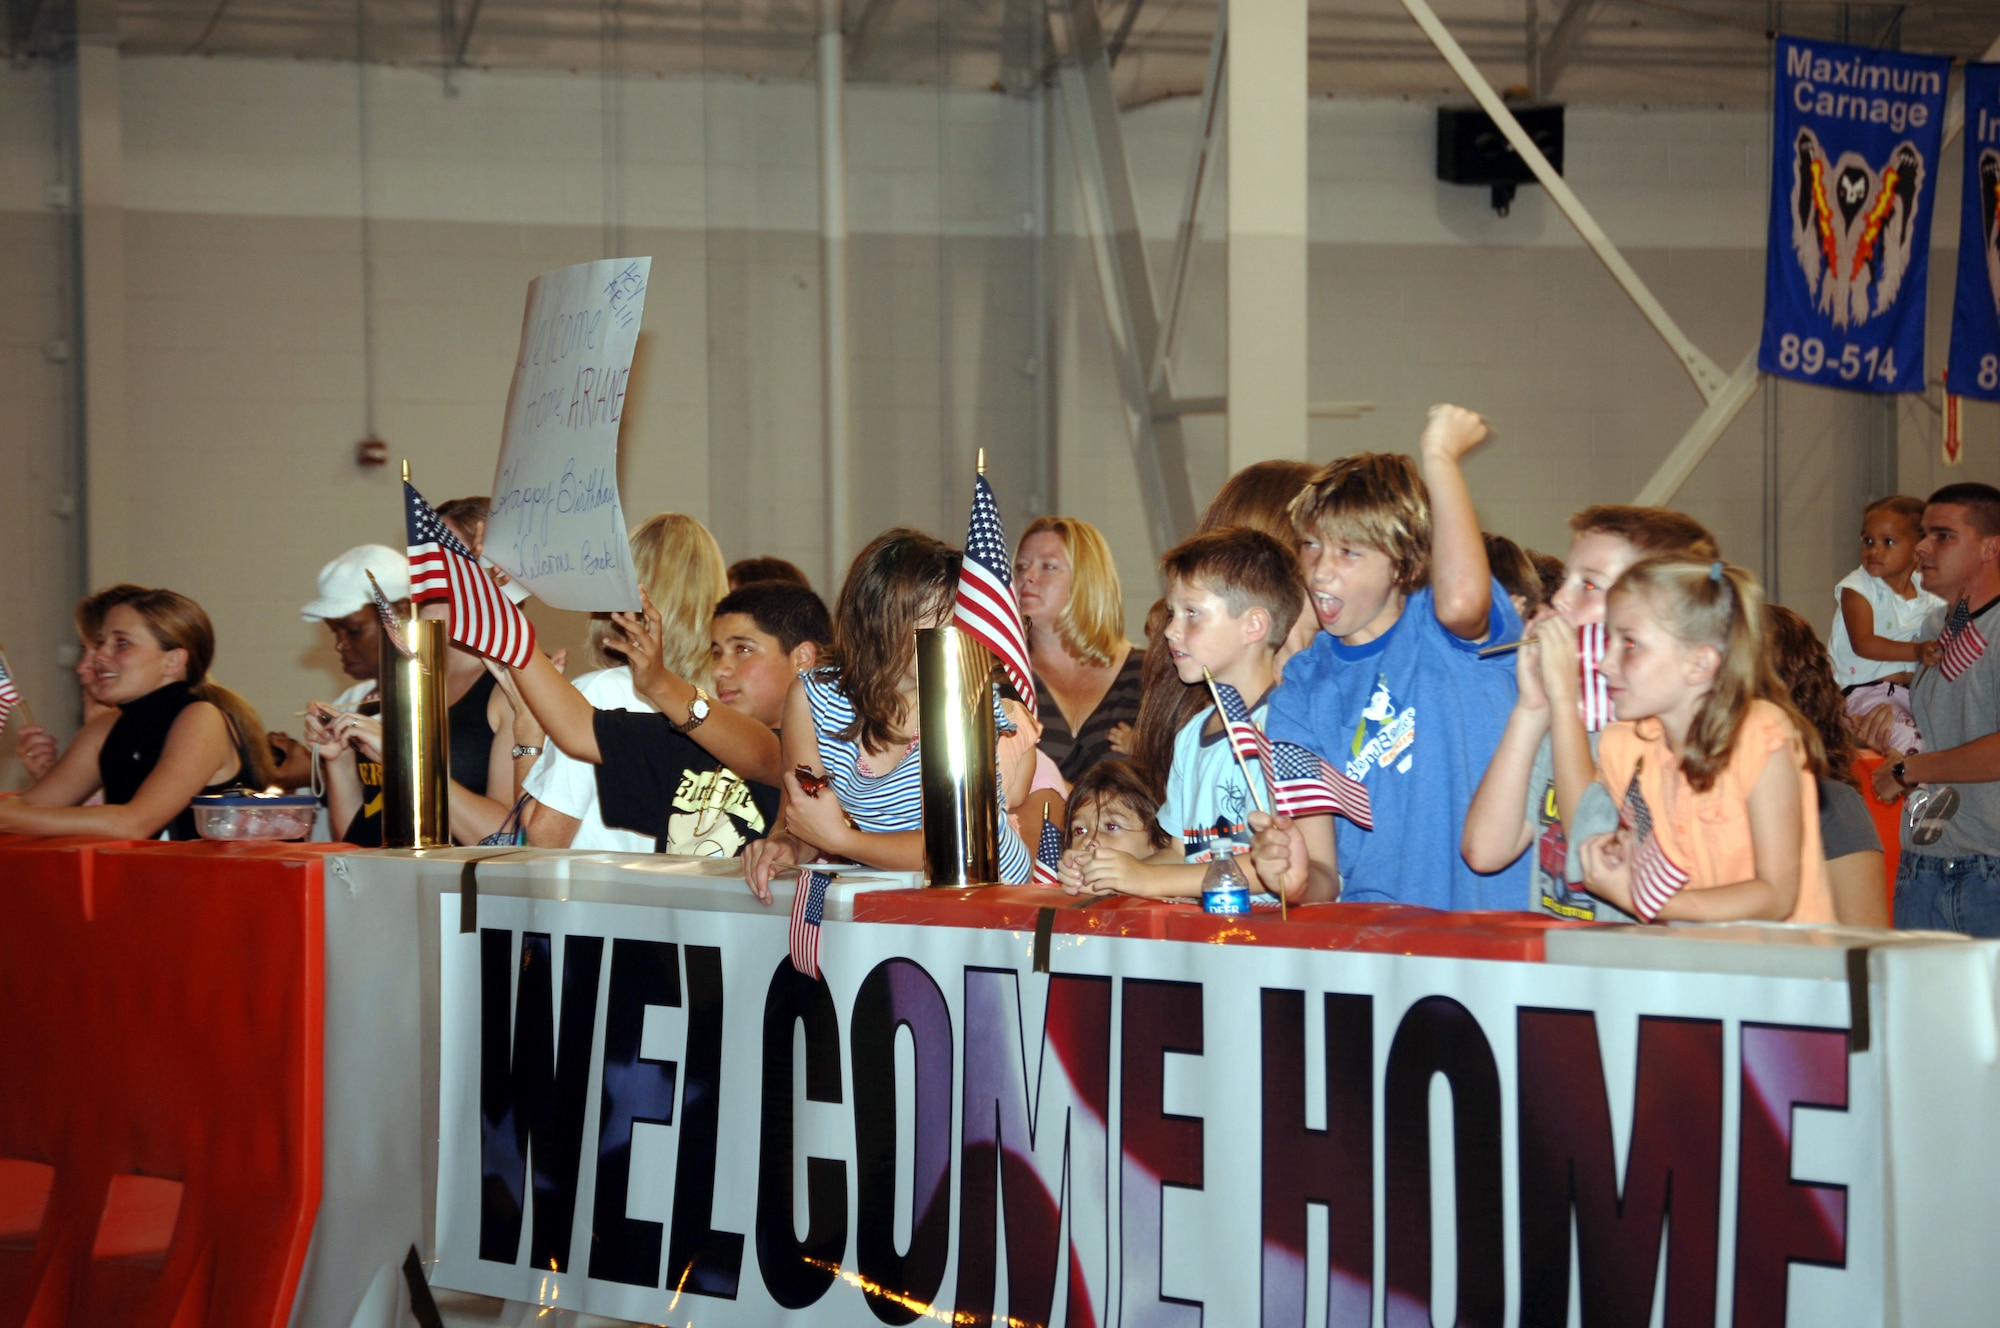 Family members cheer the arrival of their returning loved ones Monday night in Commando Hanger during the first Operation Homecoming.  More than 200 Hurlburt Field and Eglin Air Force Base Airmen returned home from Southwest Asia. (U.S. Air Force Photograph by Senior Airman Andy Kin)